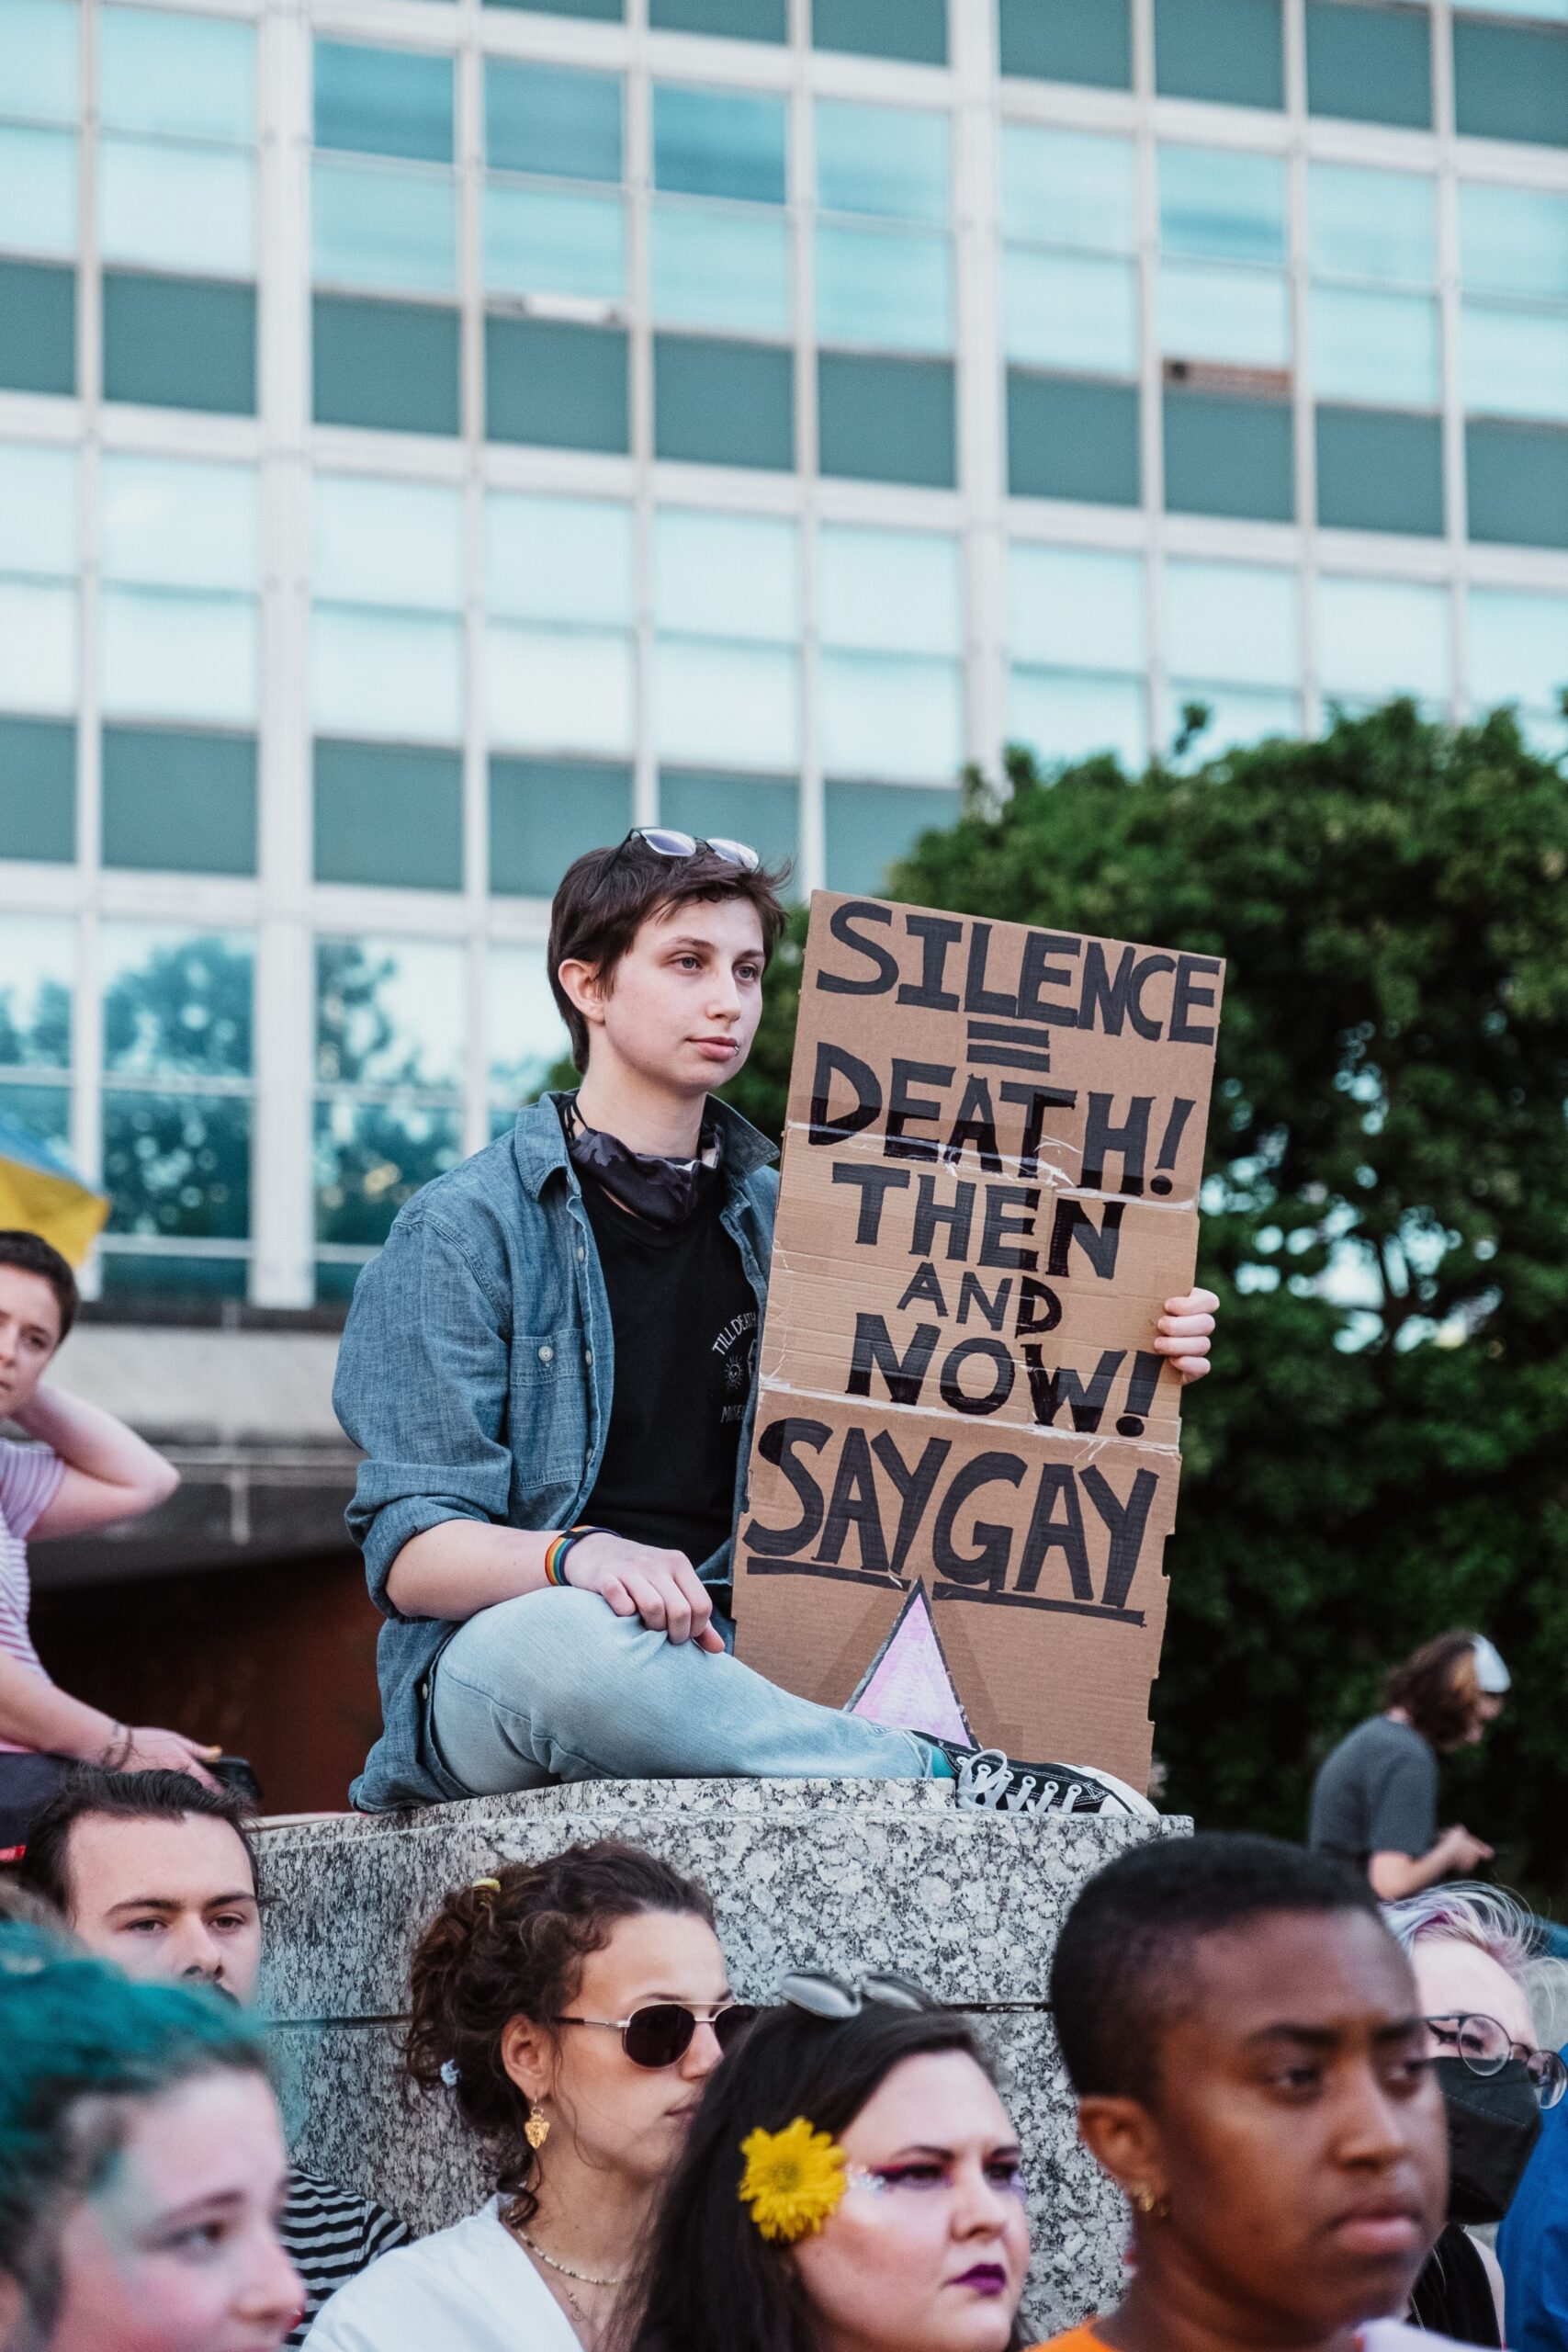 A person holding a sign with the text "Silence is death! Then and now! Say gay."